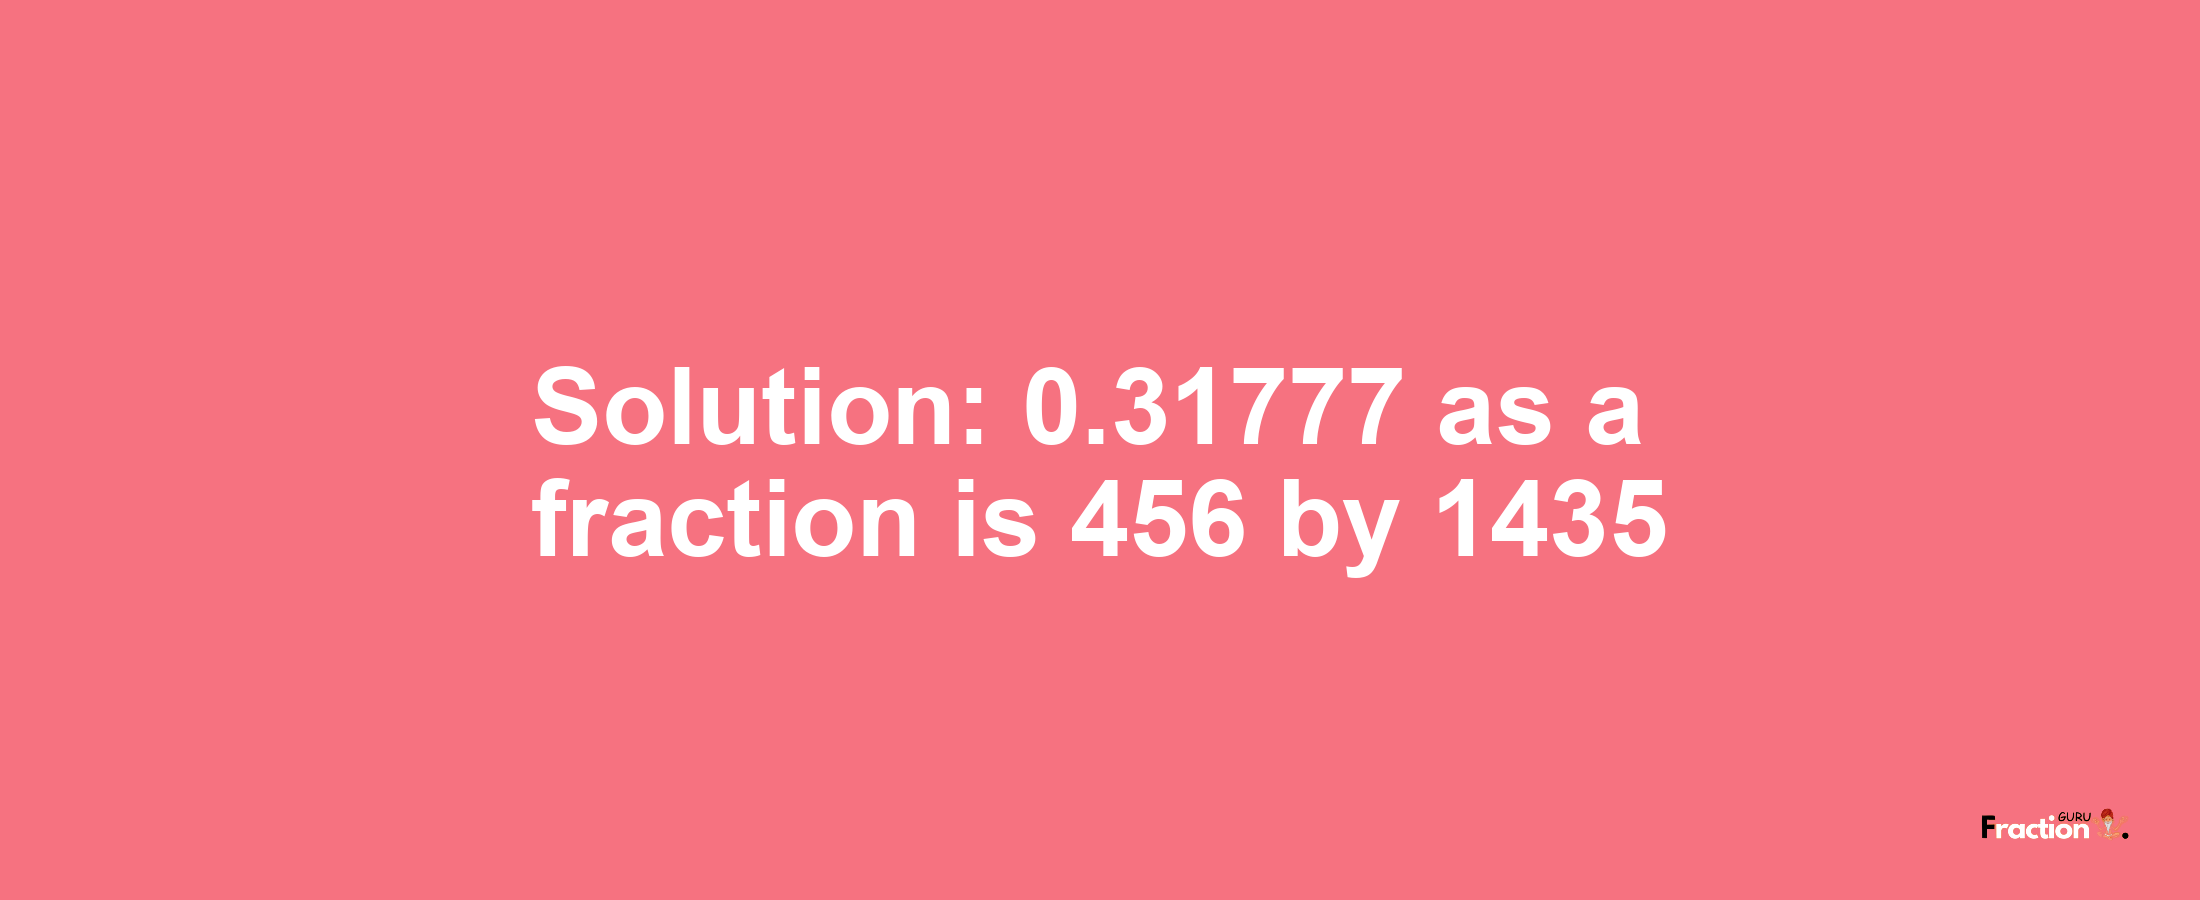 Solution:0.31777 as a fraction is 456/1435